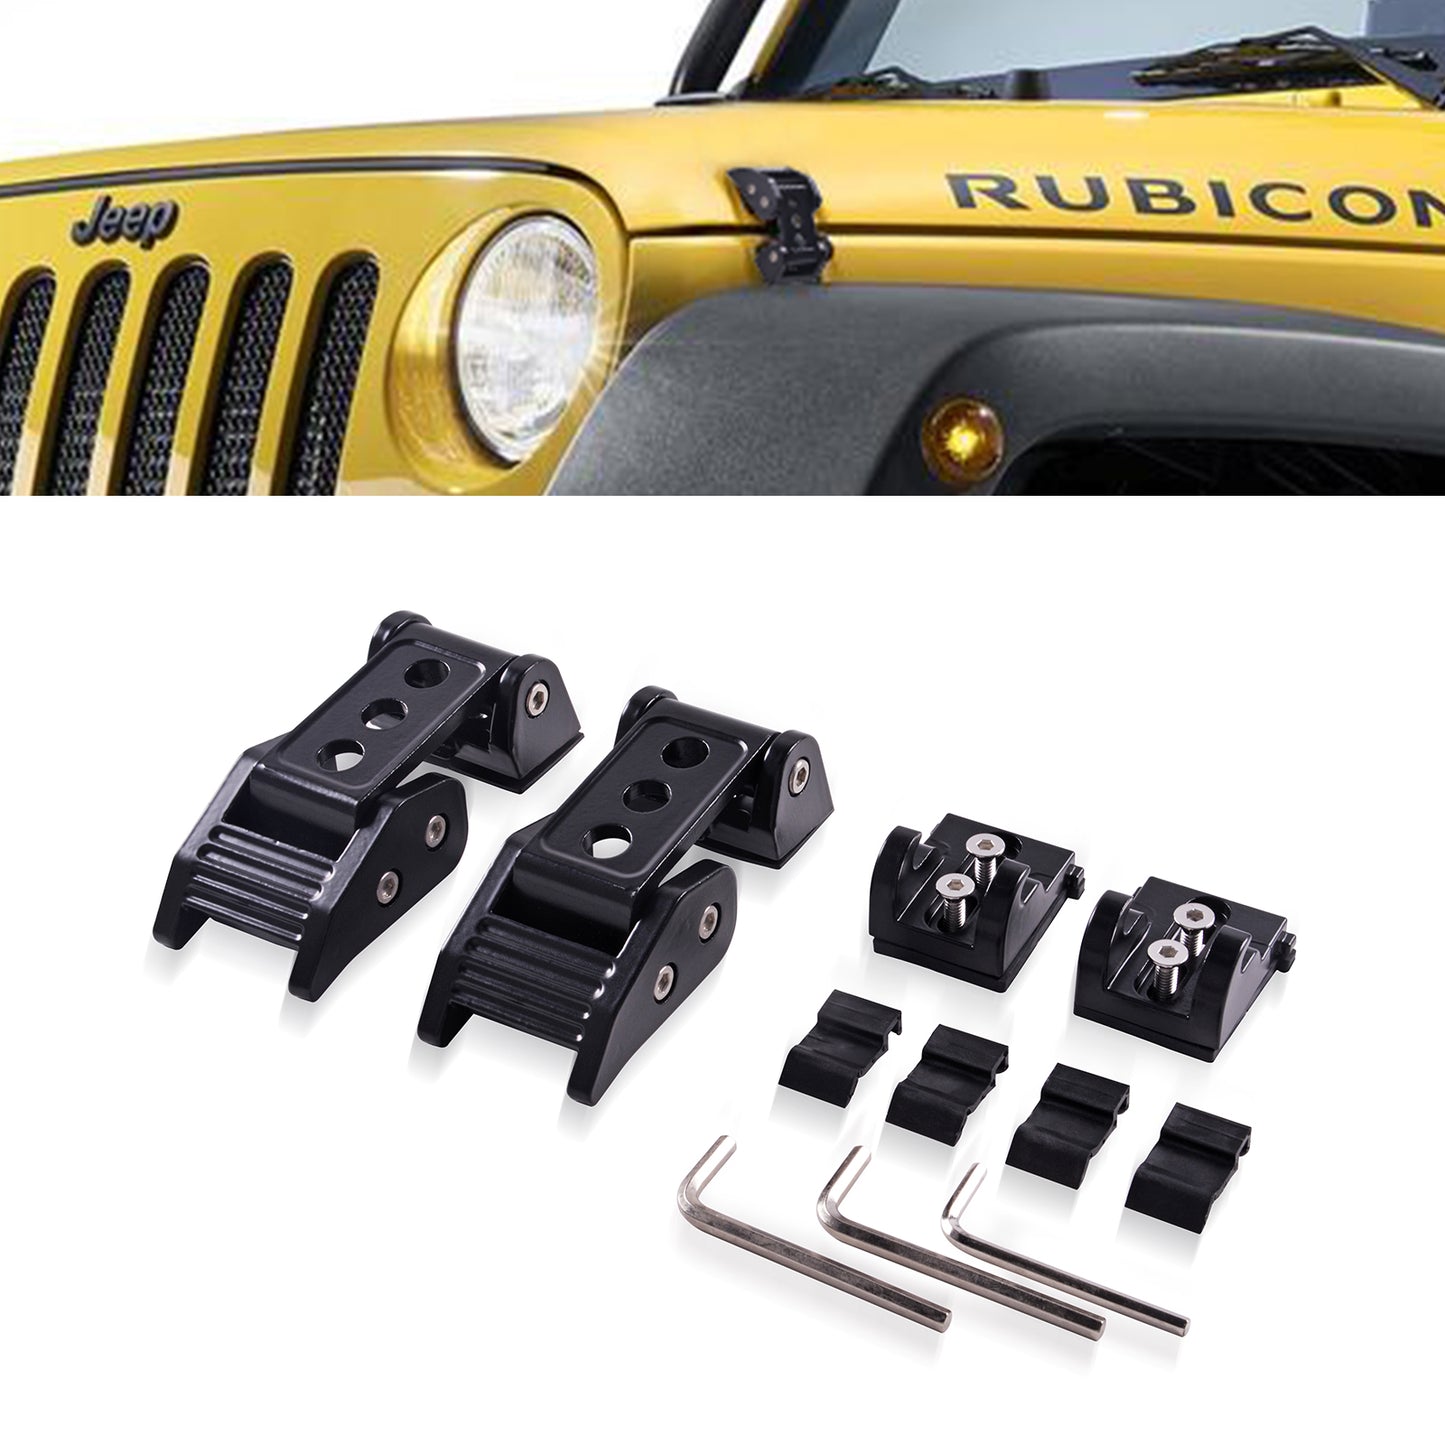 GOCPB for Jeep Hood Latches Locking Hood Catch Kit Compatible with 2007-2023 Jeep Wrangler JK JL Gladiator JT, Black